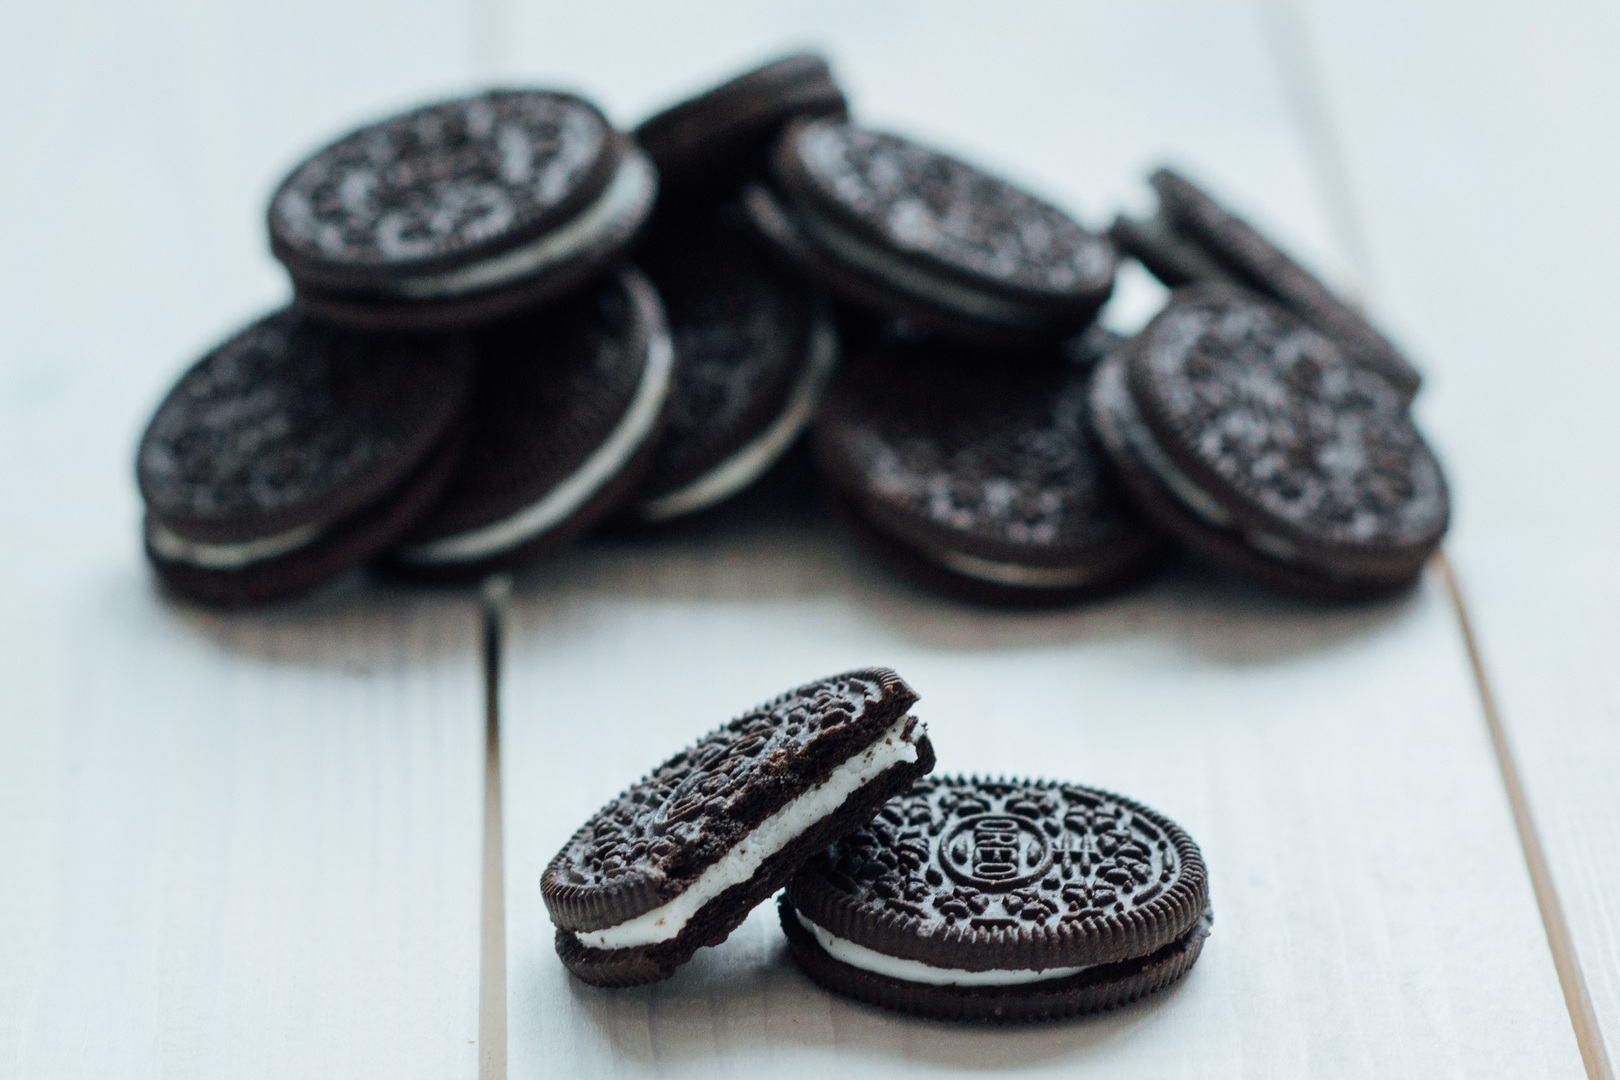 Two oreos in the front of the photo. One is missing a bite. A pile of oreos in the back of the photo, out of focus.